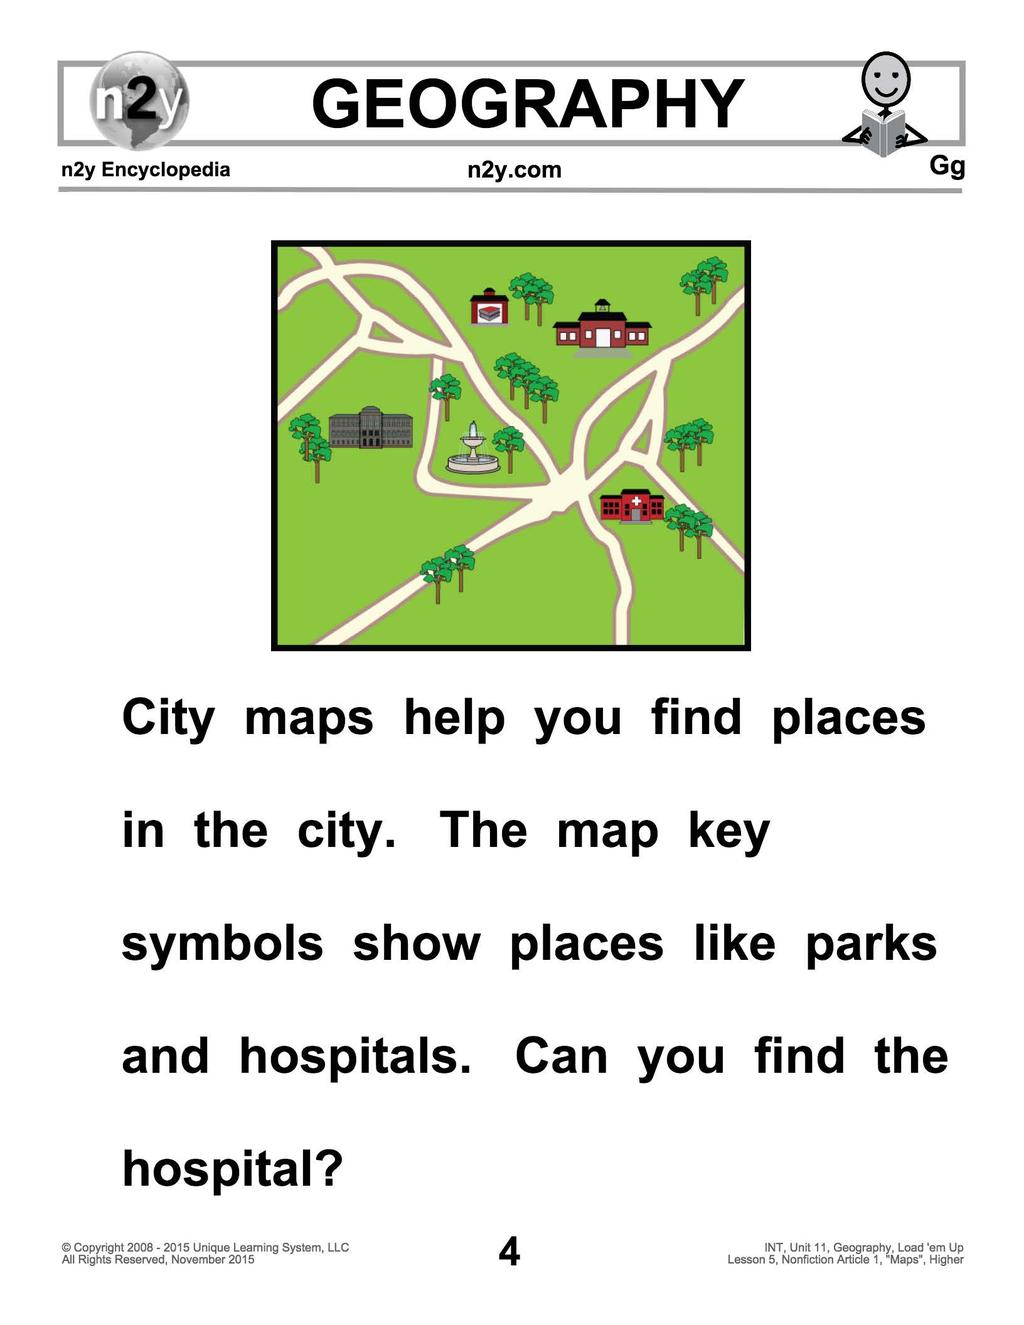 City maps help you find places in the city. The map key symbols show places like parks and hospitals.